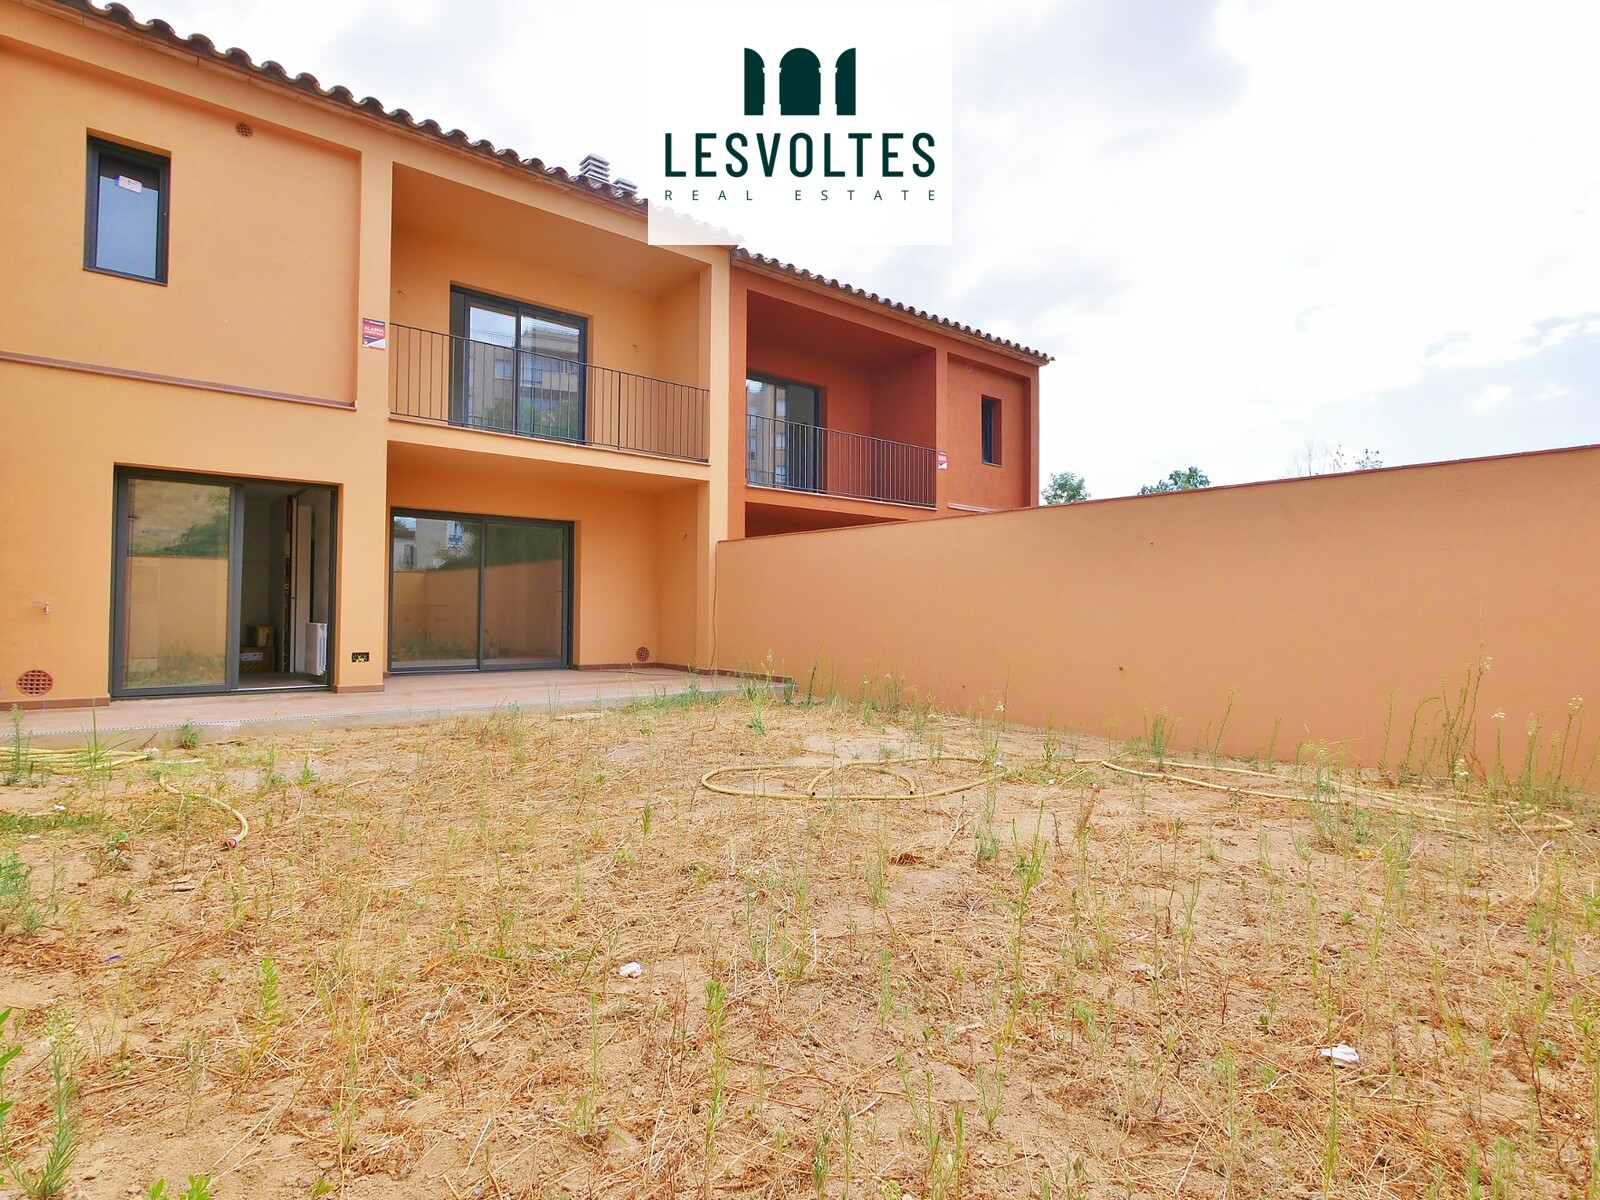 GREAT OPPORTUNITY IN PALAFRUGELL! NEW CONSTRUCTION HOUSE WITH GARAGE AND GARDEN